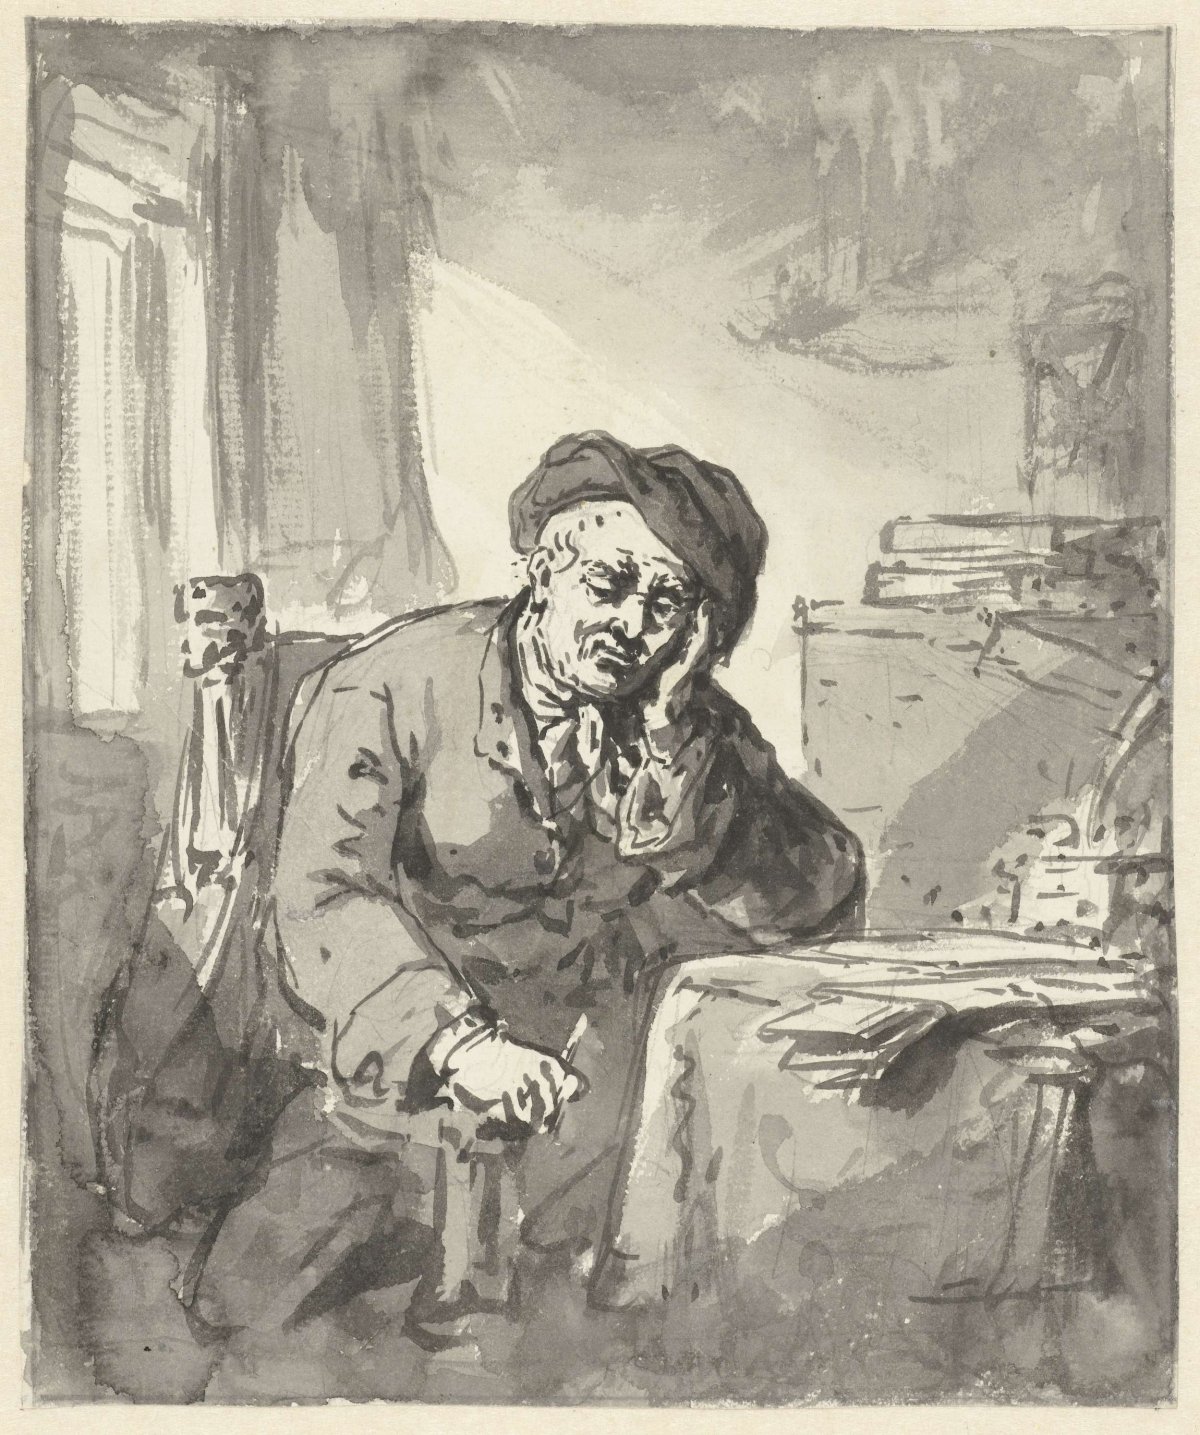 Man seated at table, head resting on left arm, Abraham van Strij (I), 1763 - 1826